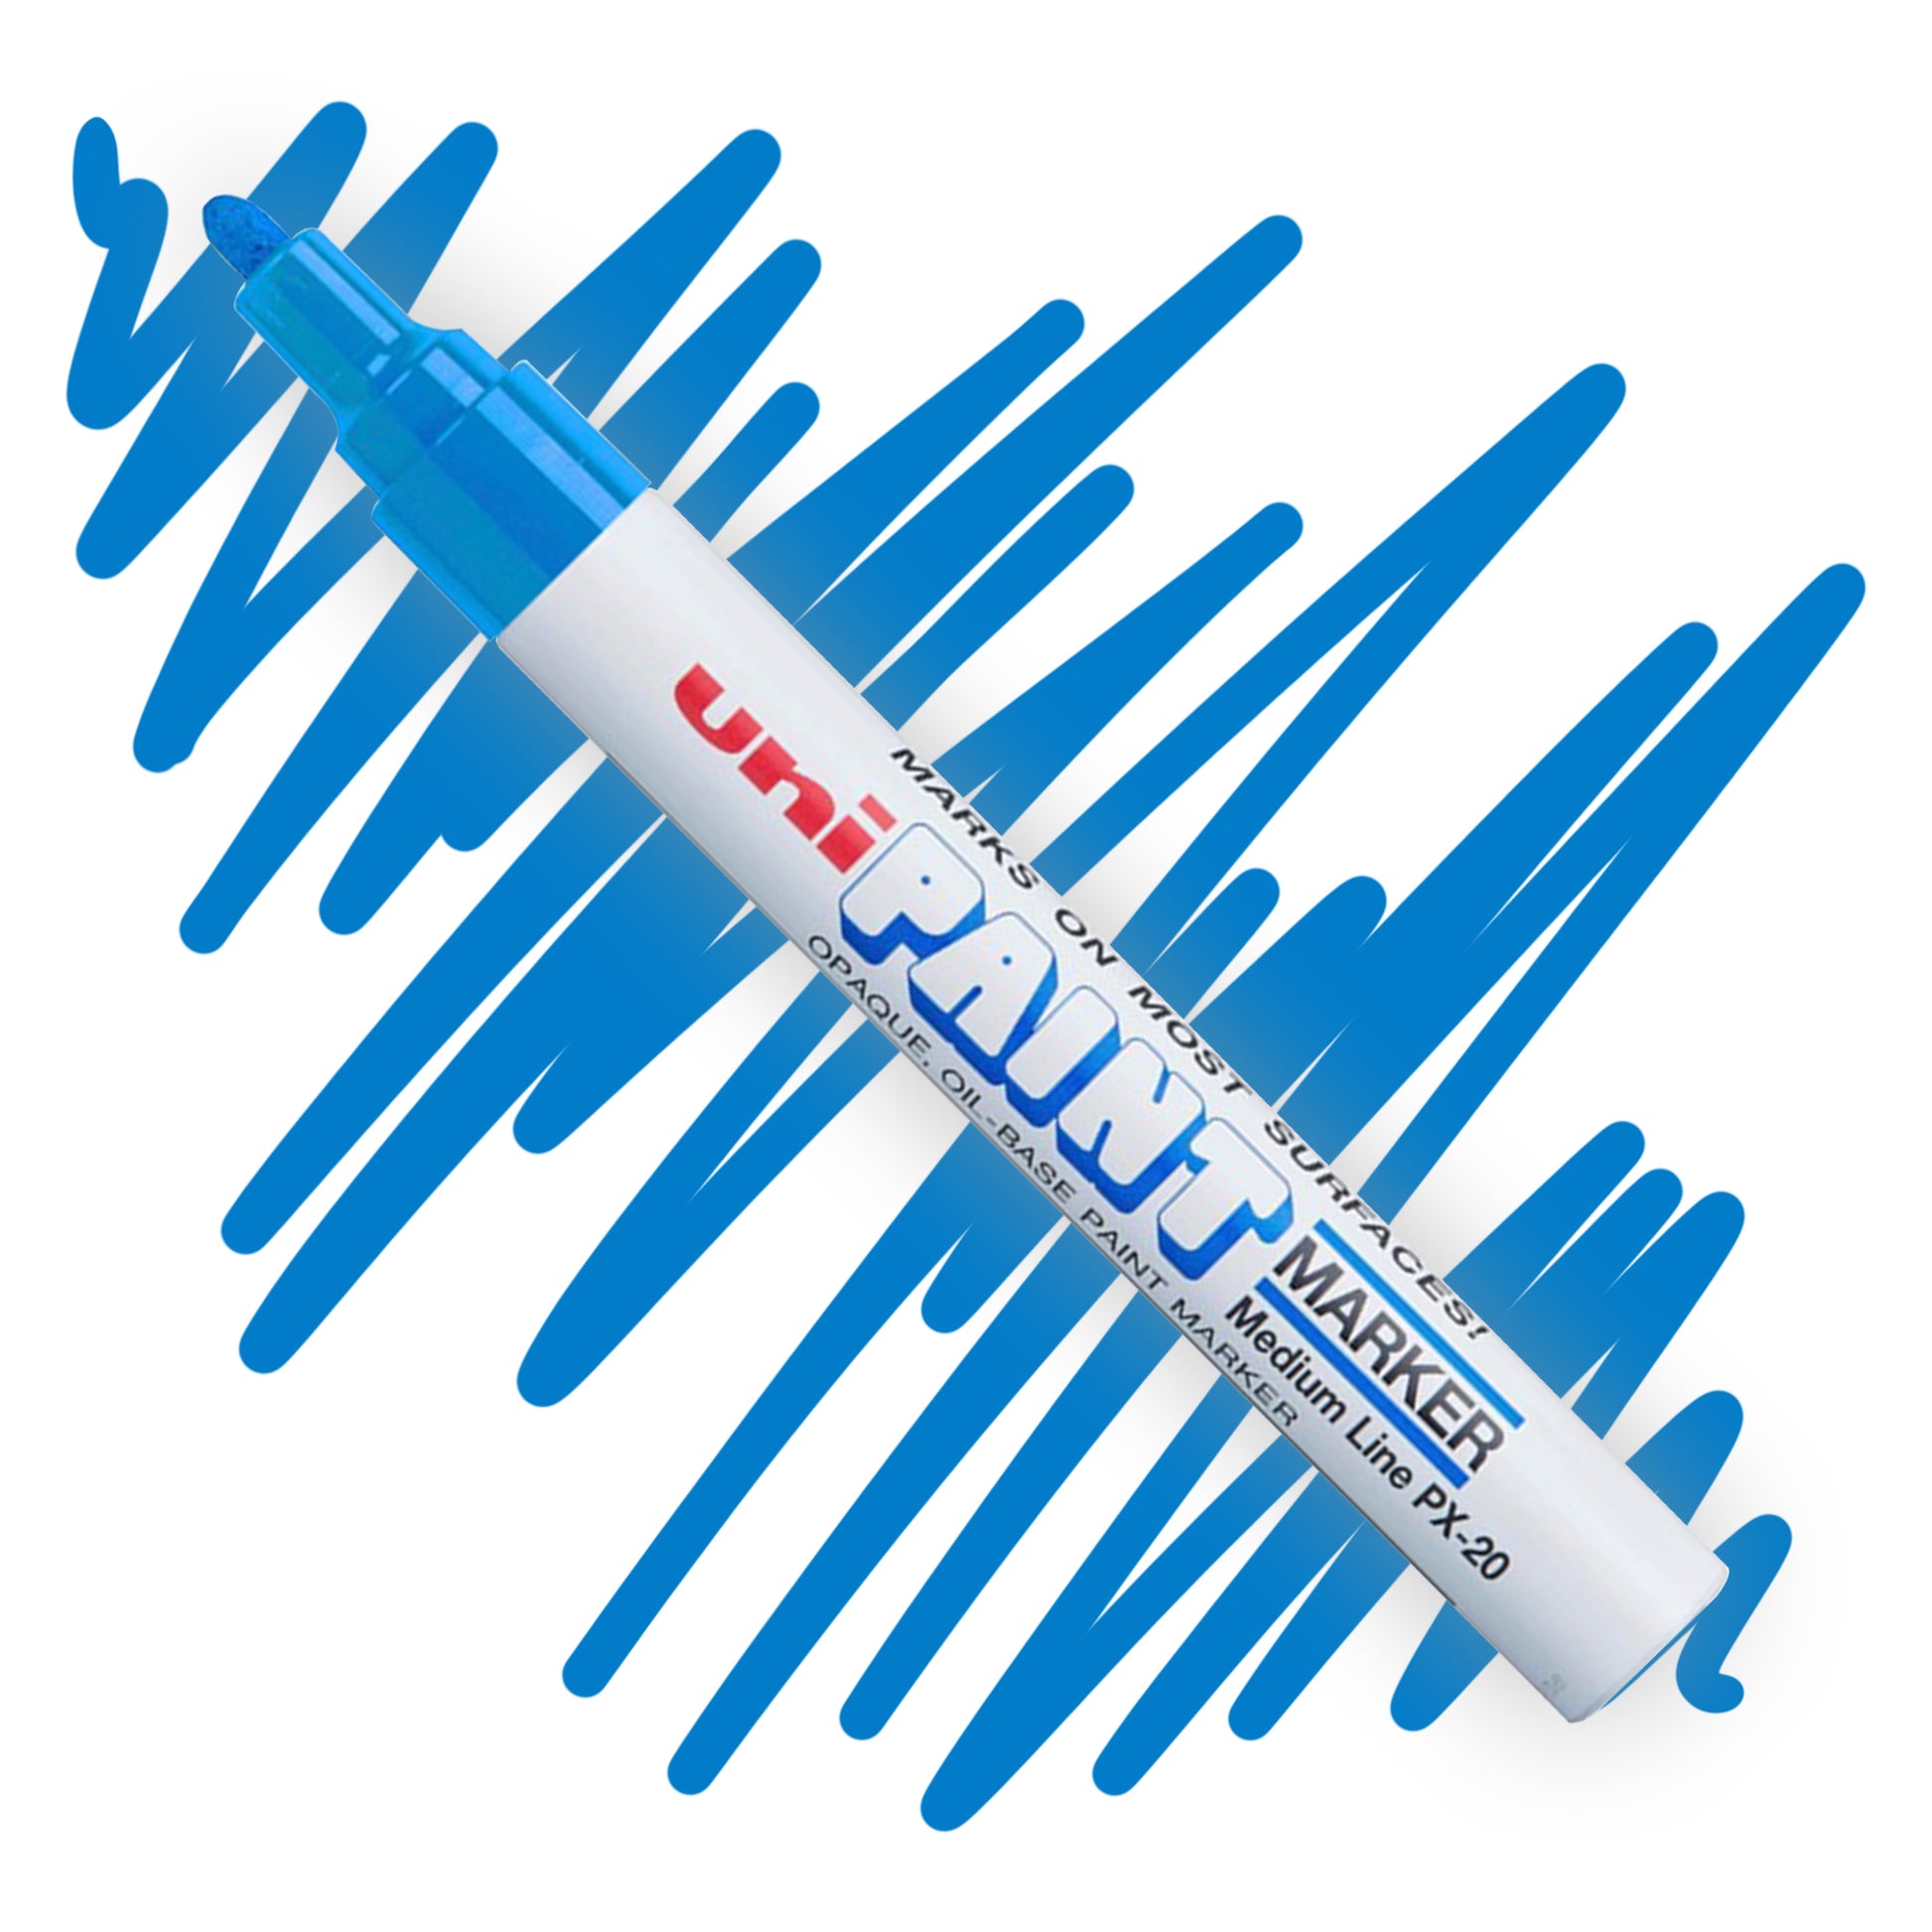 A white marker angled diagonally, the tip of the marker and the nib are colored light blue. On the marker body the label reads "Uni PAINT Maker". Behind the marker is a color swatch of a squiggly line in light blue..